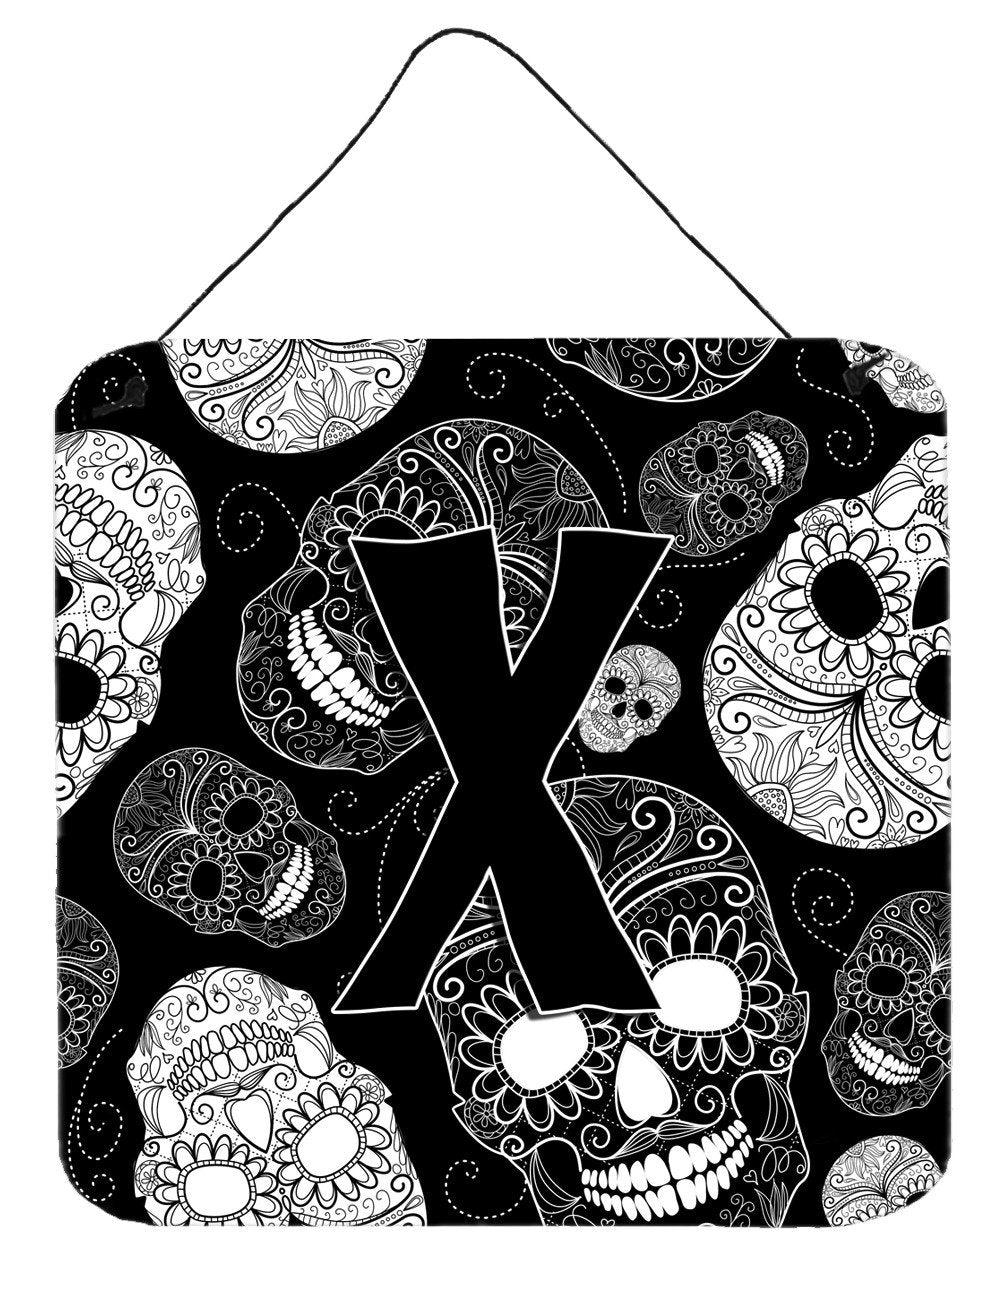 Letter X Day of the Dead Skulls Black Wall or Door Hanging Prints CJ2008-XDS66 by Caroline's Treasures